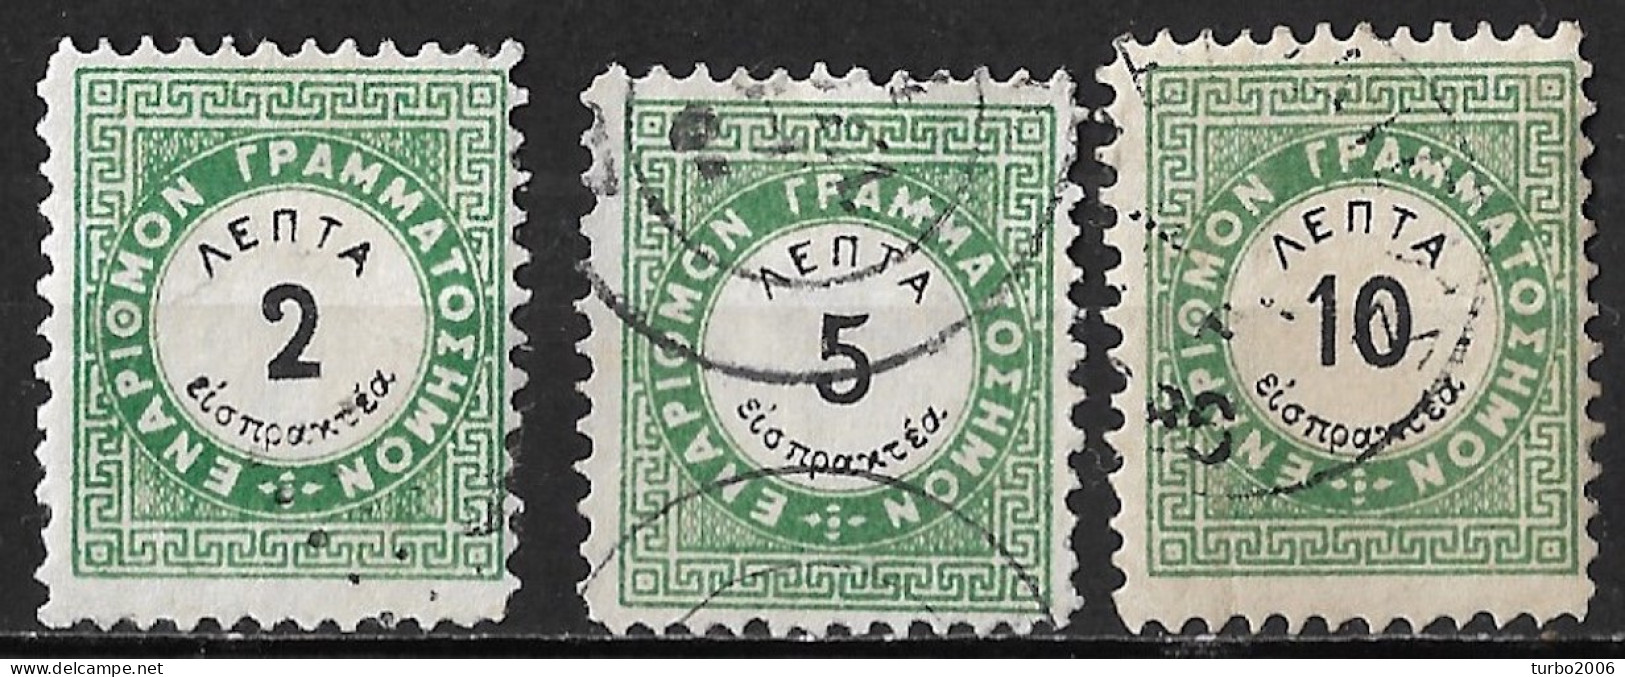 GREECE 1875 Postage Due Vienna Issue I Small Capitals 2-5-10 L. Green / Black Perforation 10½ Vl. D 2 A - D 3 A - D 4 A - Usados